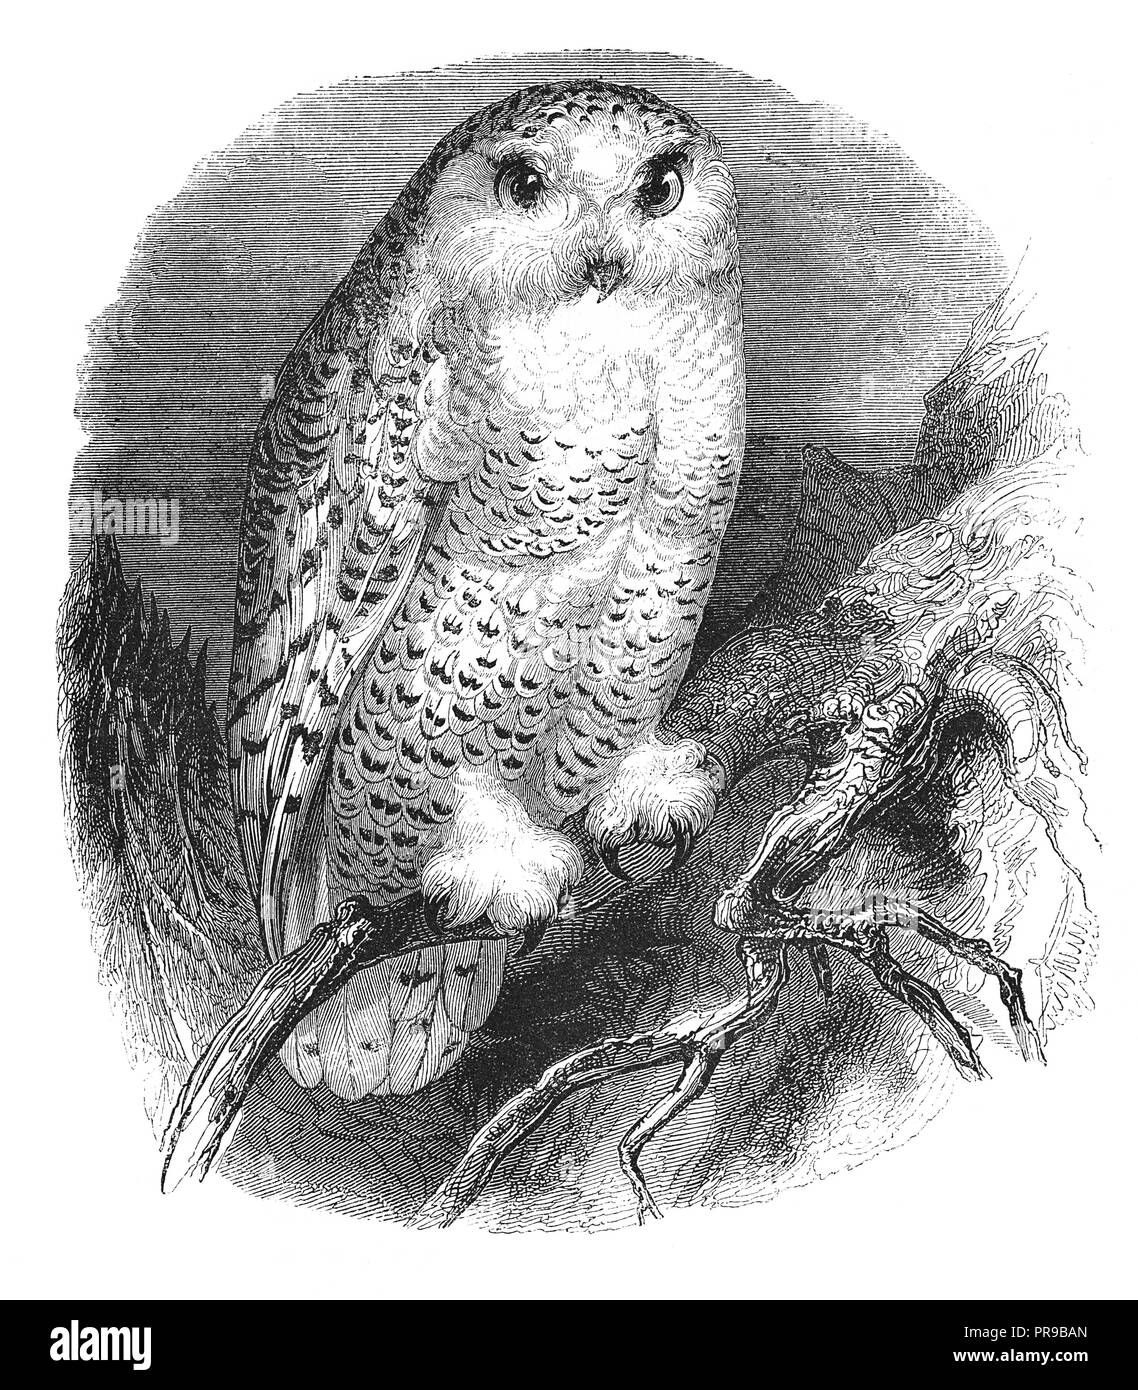 19th century illustration of snowy owl, Strix Nyctea L. Original artwork published in Le magasin Pittoresque by M. A. Lachevardiere, Paris, 1846. Stock Photo